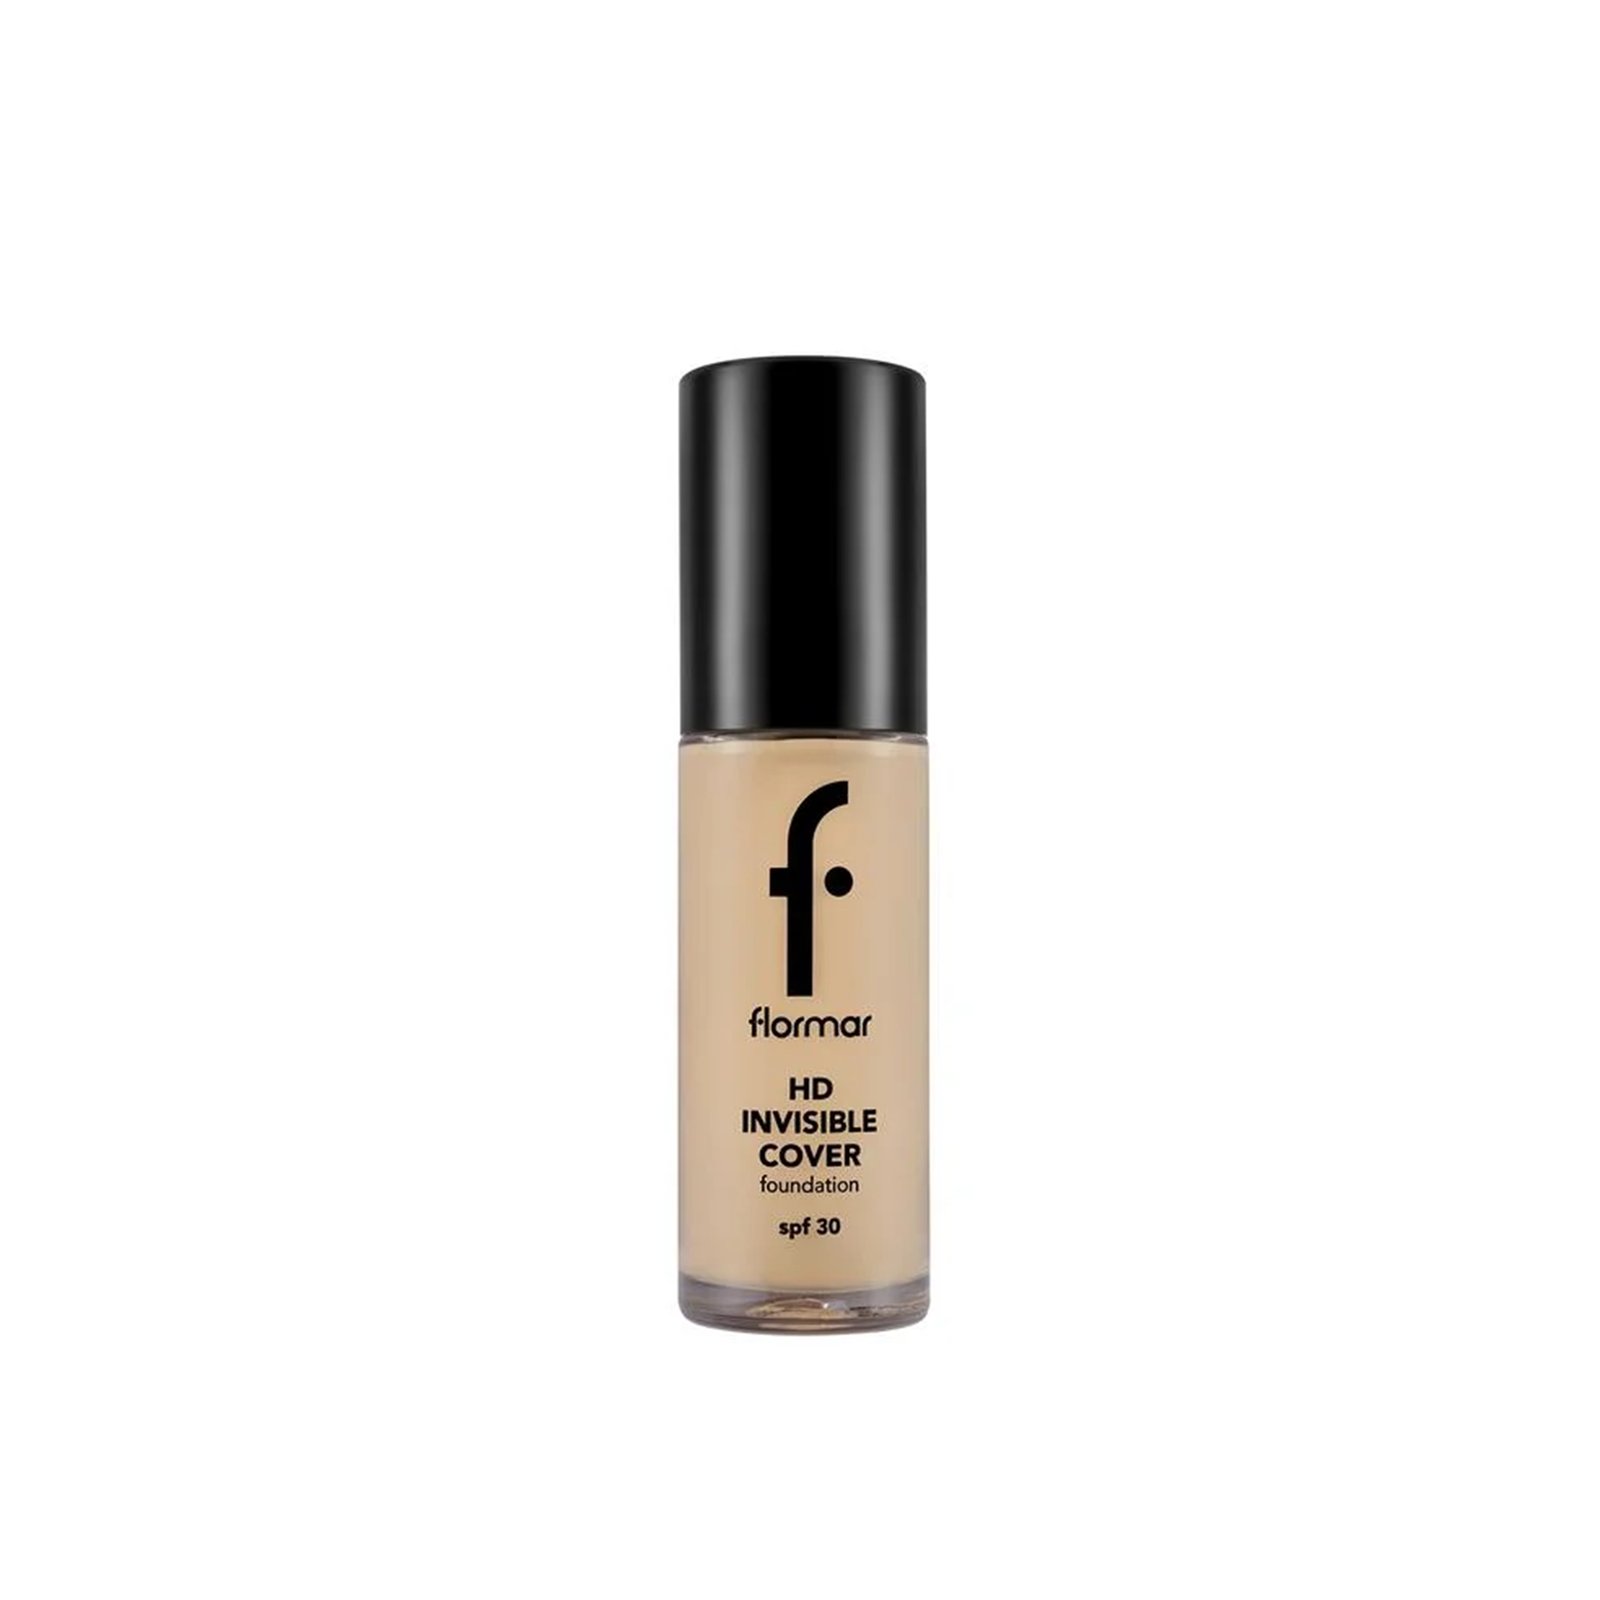 Flormar Invisible Cover HD Foundation SPF30 50 Light Beige 30ml (1.01floz)